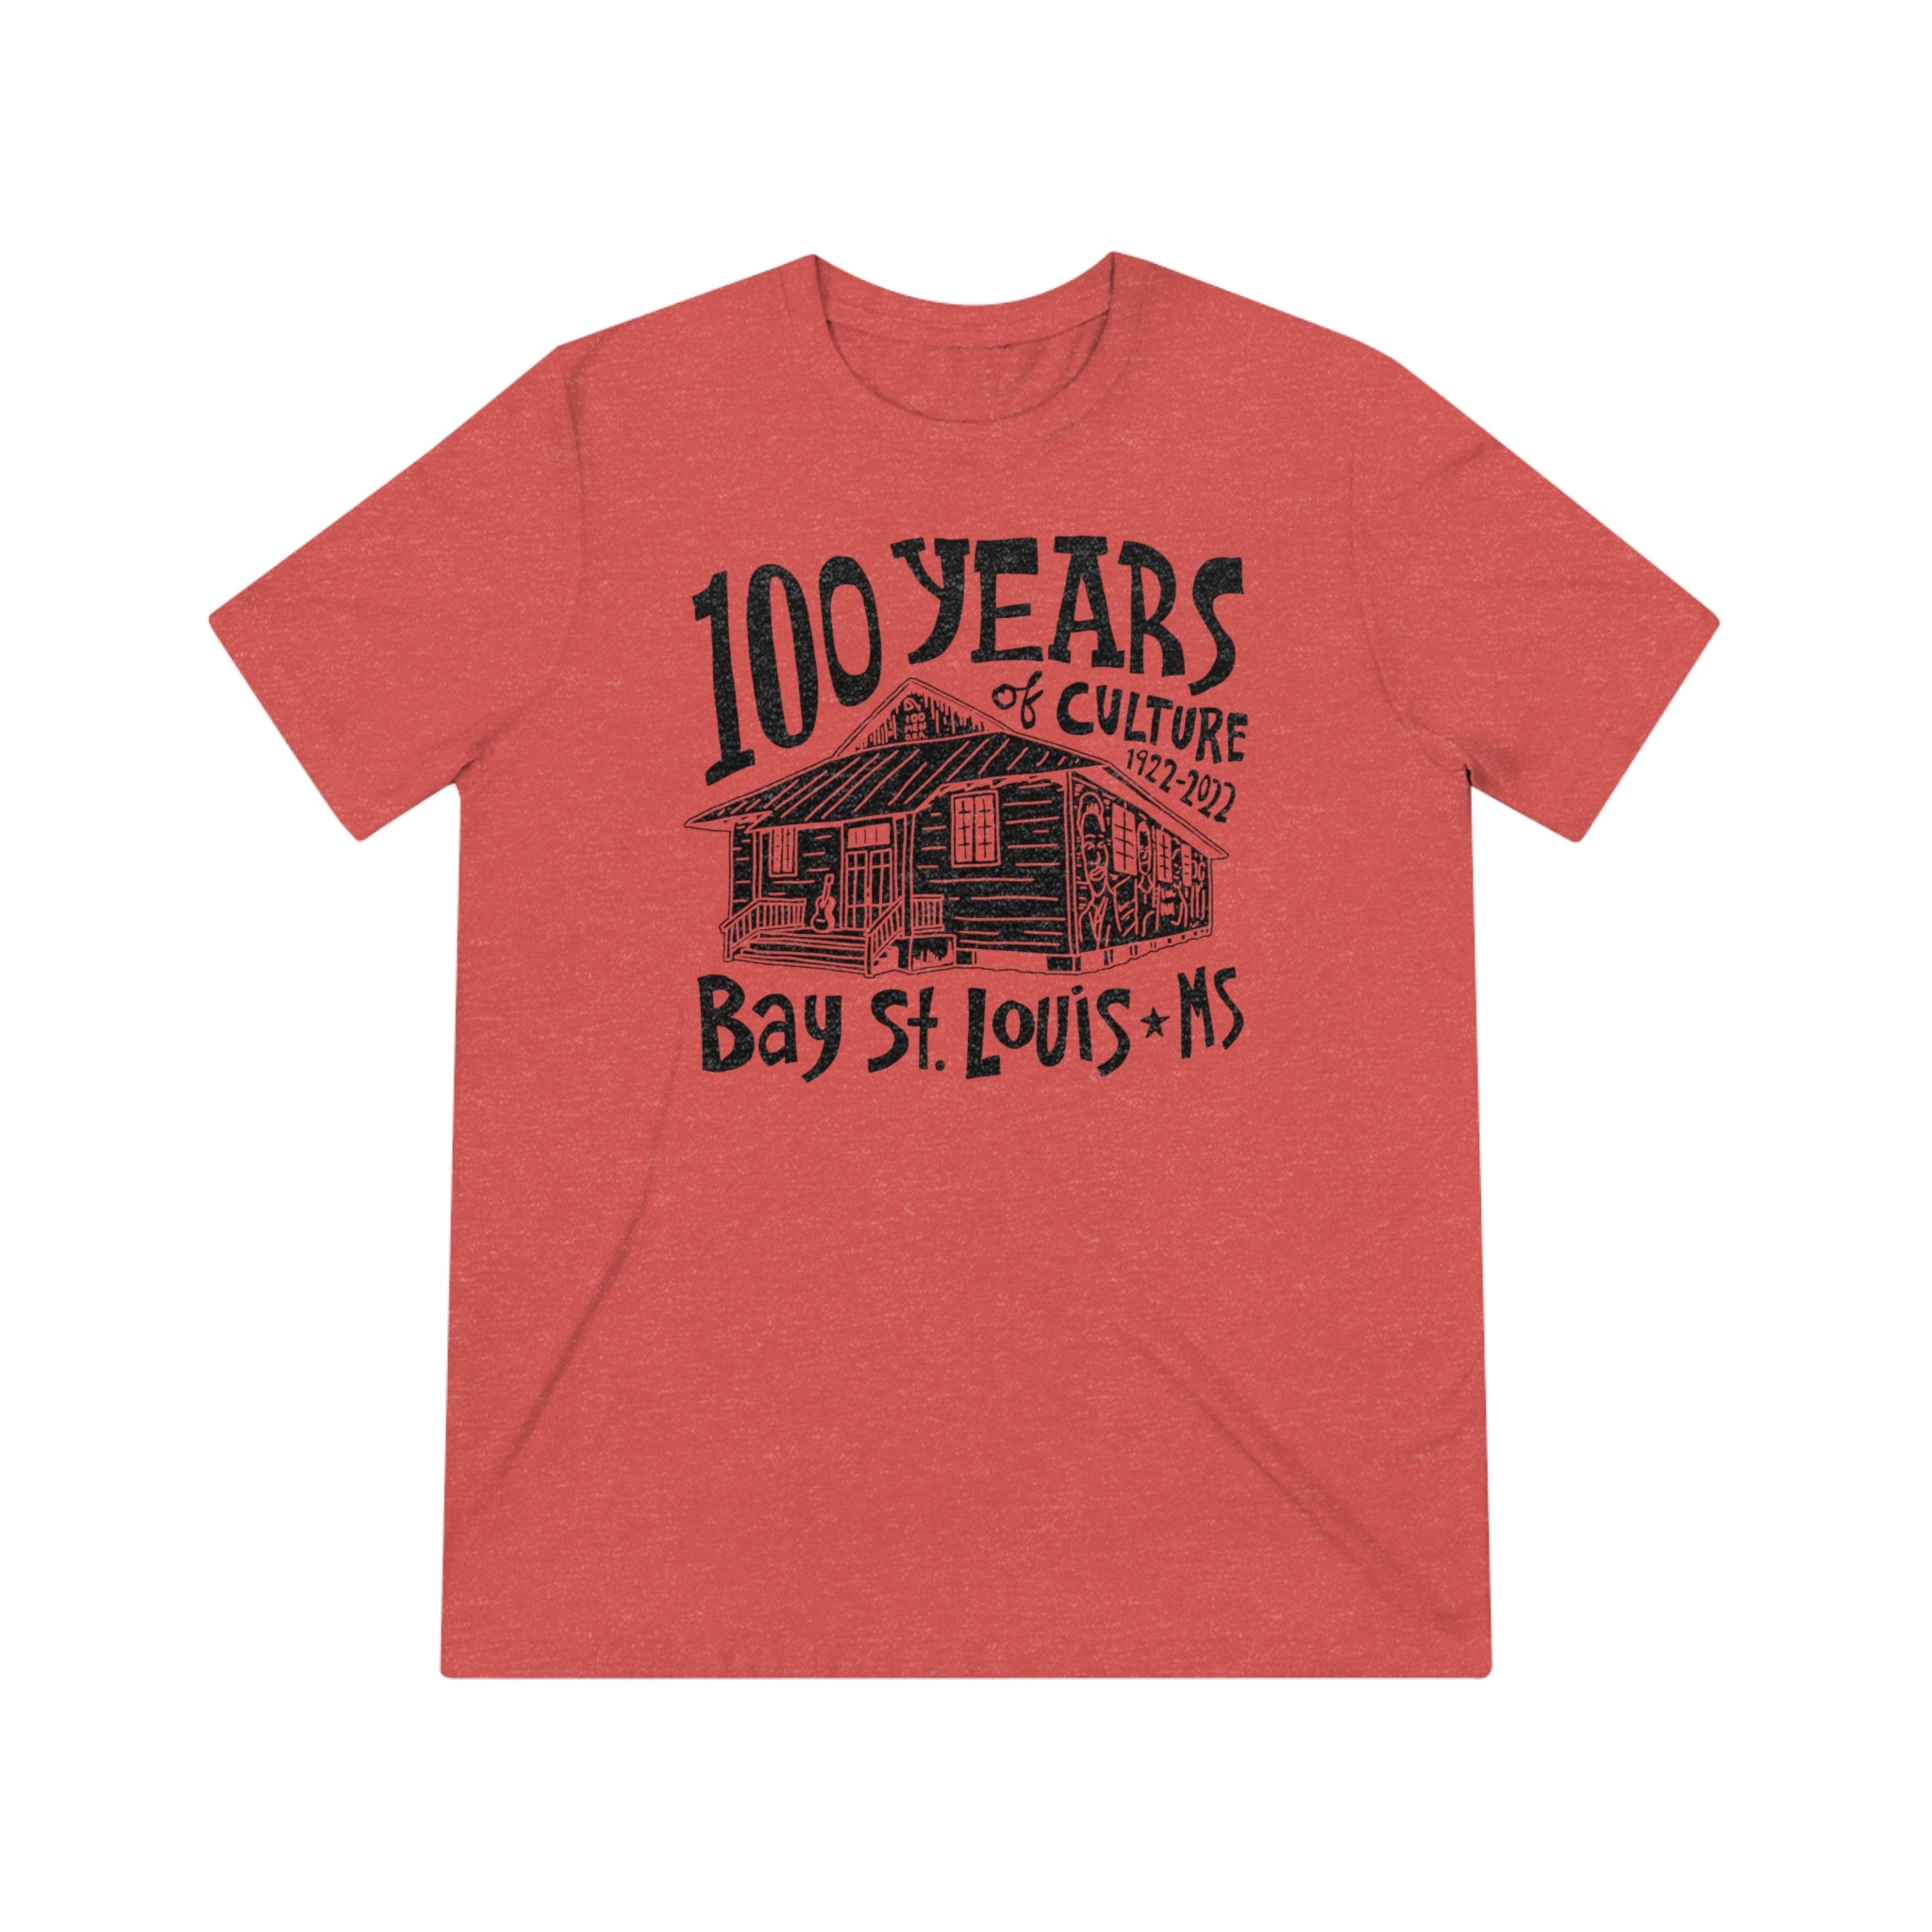 100 Years of Culture T-Shirt - Red